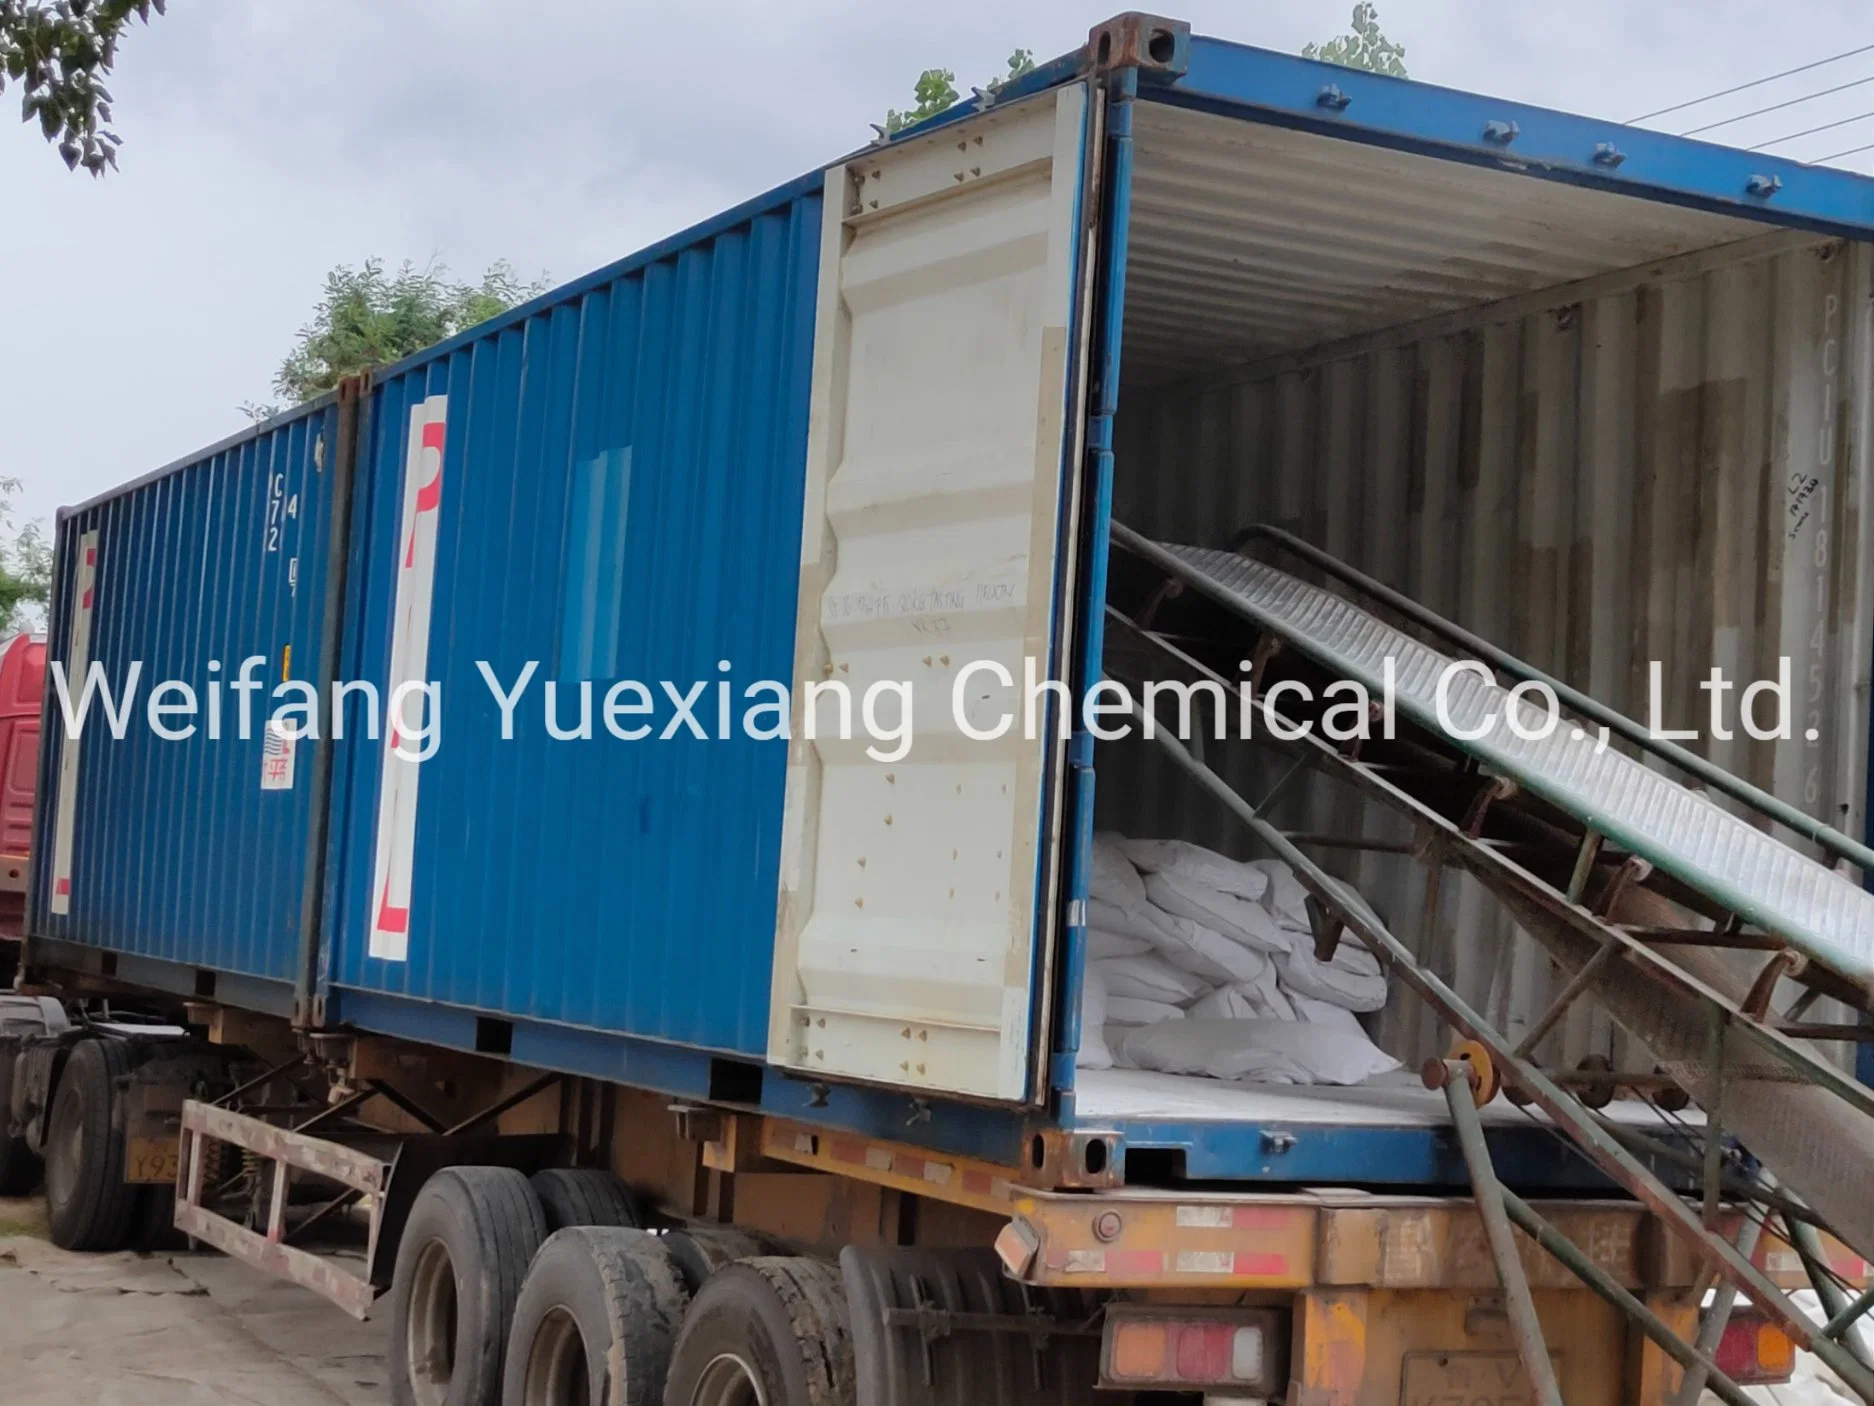 Hot Sell Bentonite Clay Activated Bleaching Earth /Fuller Clay for Engine Oil Disel Oil Waste Oil Decolor